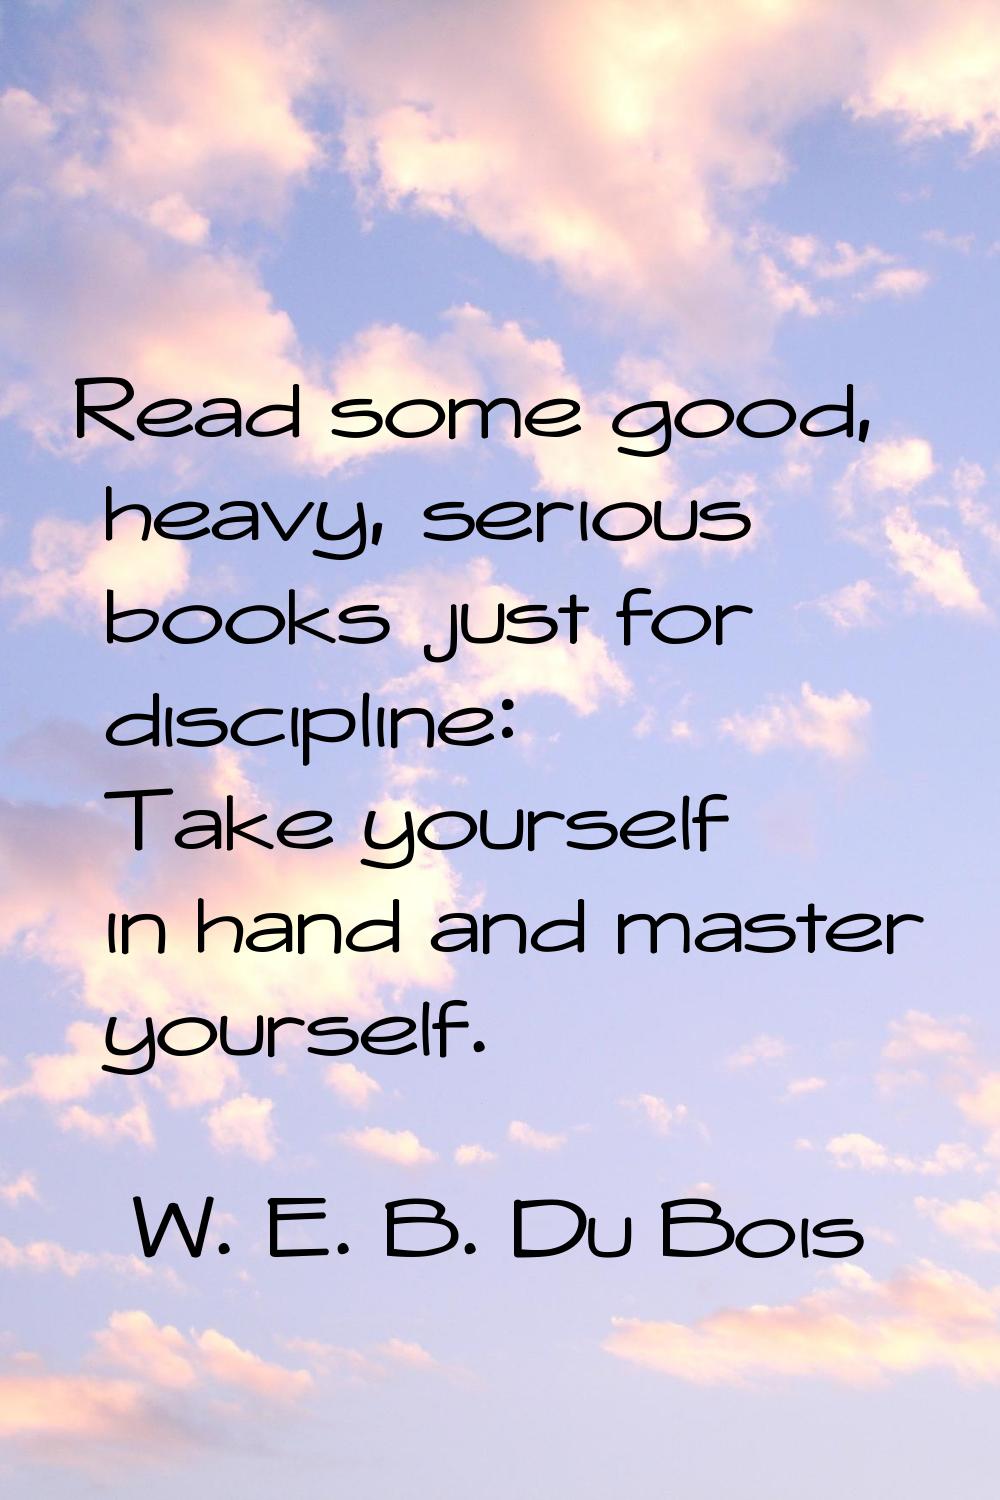 Read some good, heavy, serious books just for discipline: Take yourself in hand and master yourself